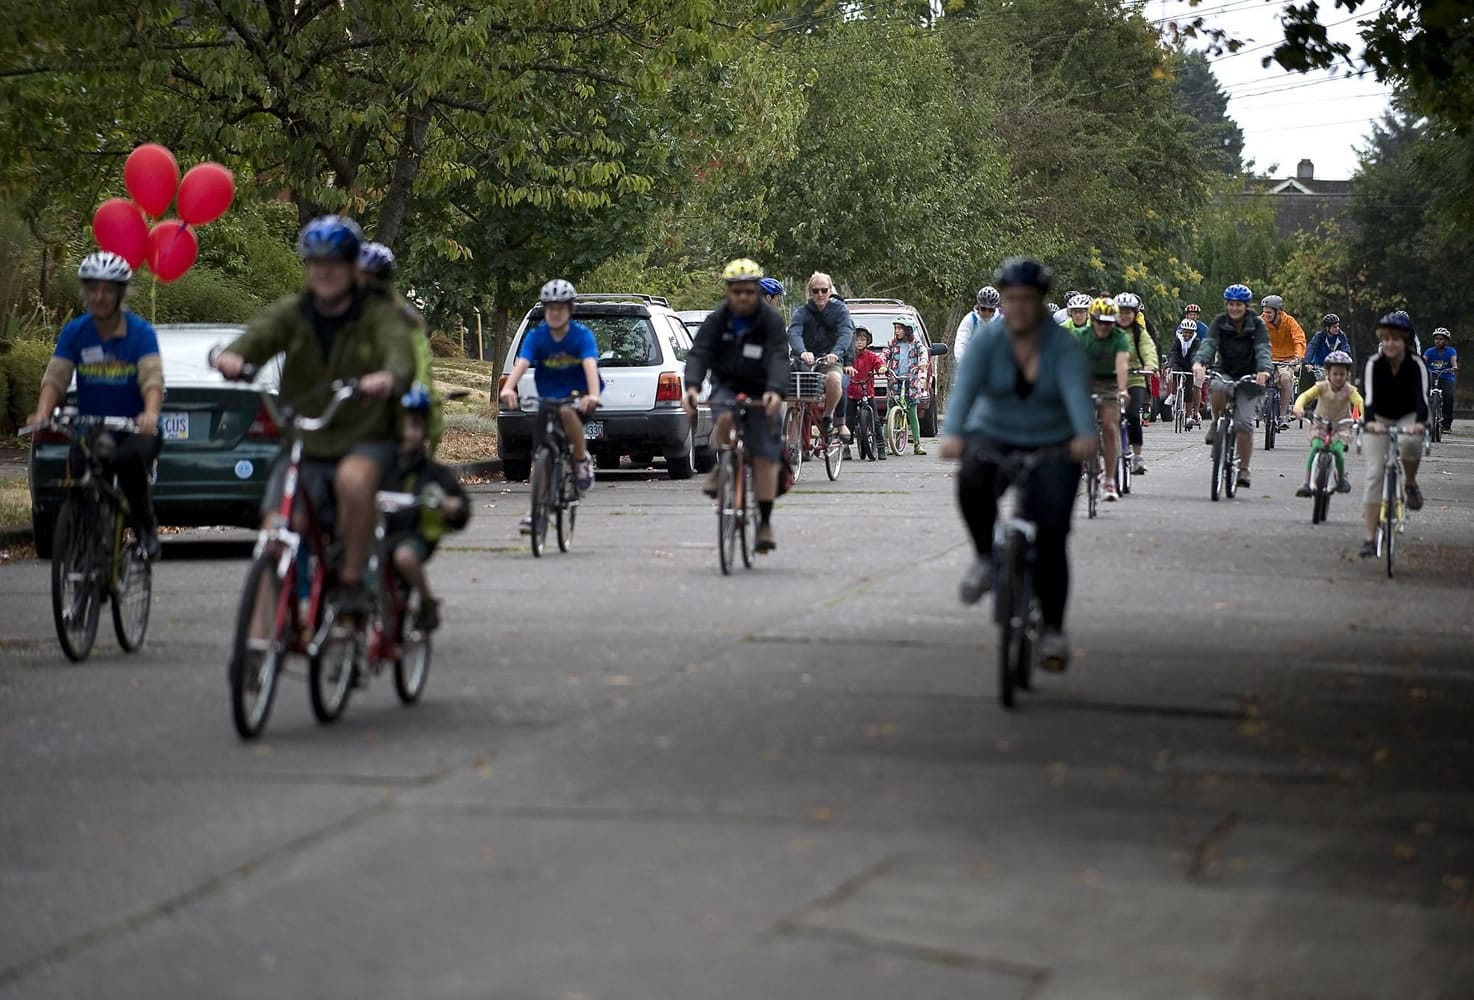 Clark County residents, including members of the county's Youth Commission, ride north on Northeast 17th Avenue in Portland while participating in a Sunday Parkways ride. The event closes streets to vehicles as a way to encourage people to explore their neighborhoods.